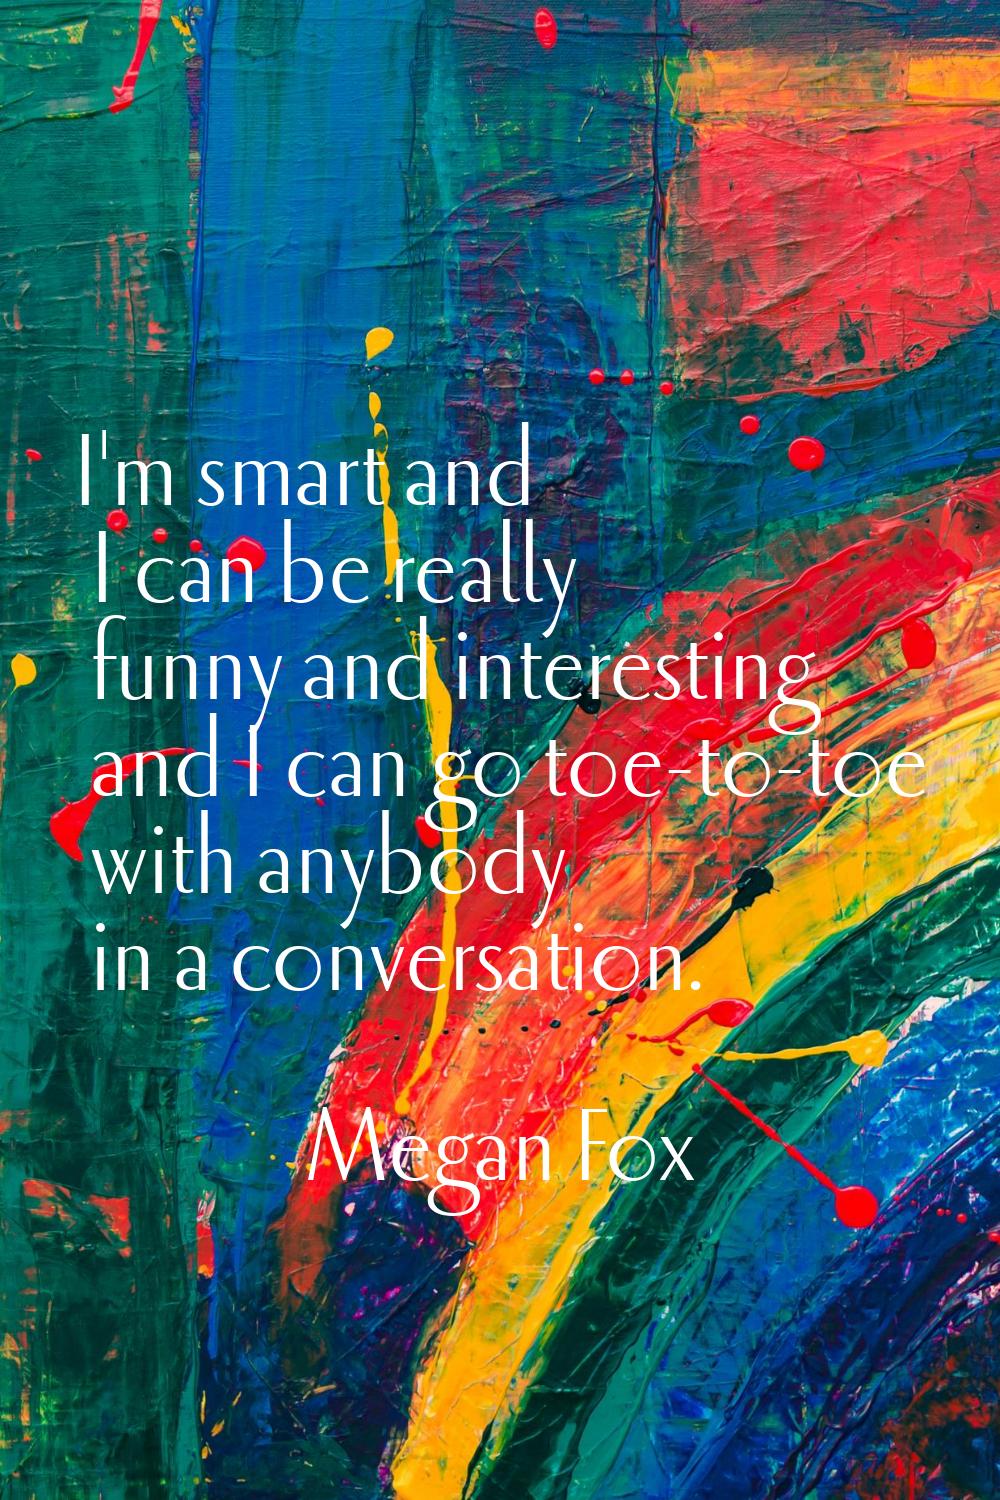 I'm smart and I can be really funny and interesting and I can go toe-to-toe with anybody in a conve